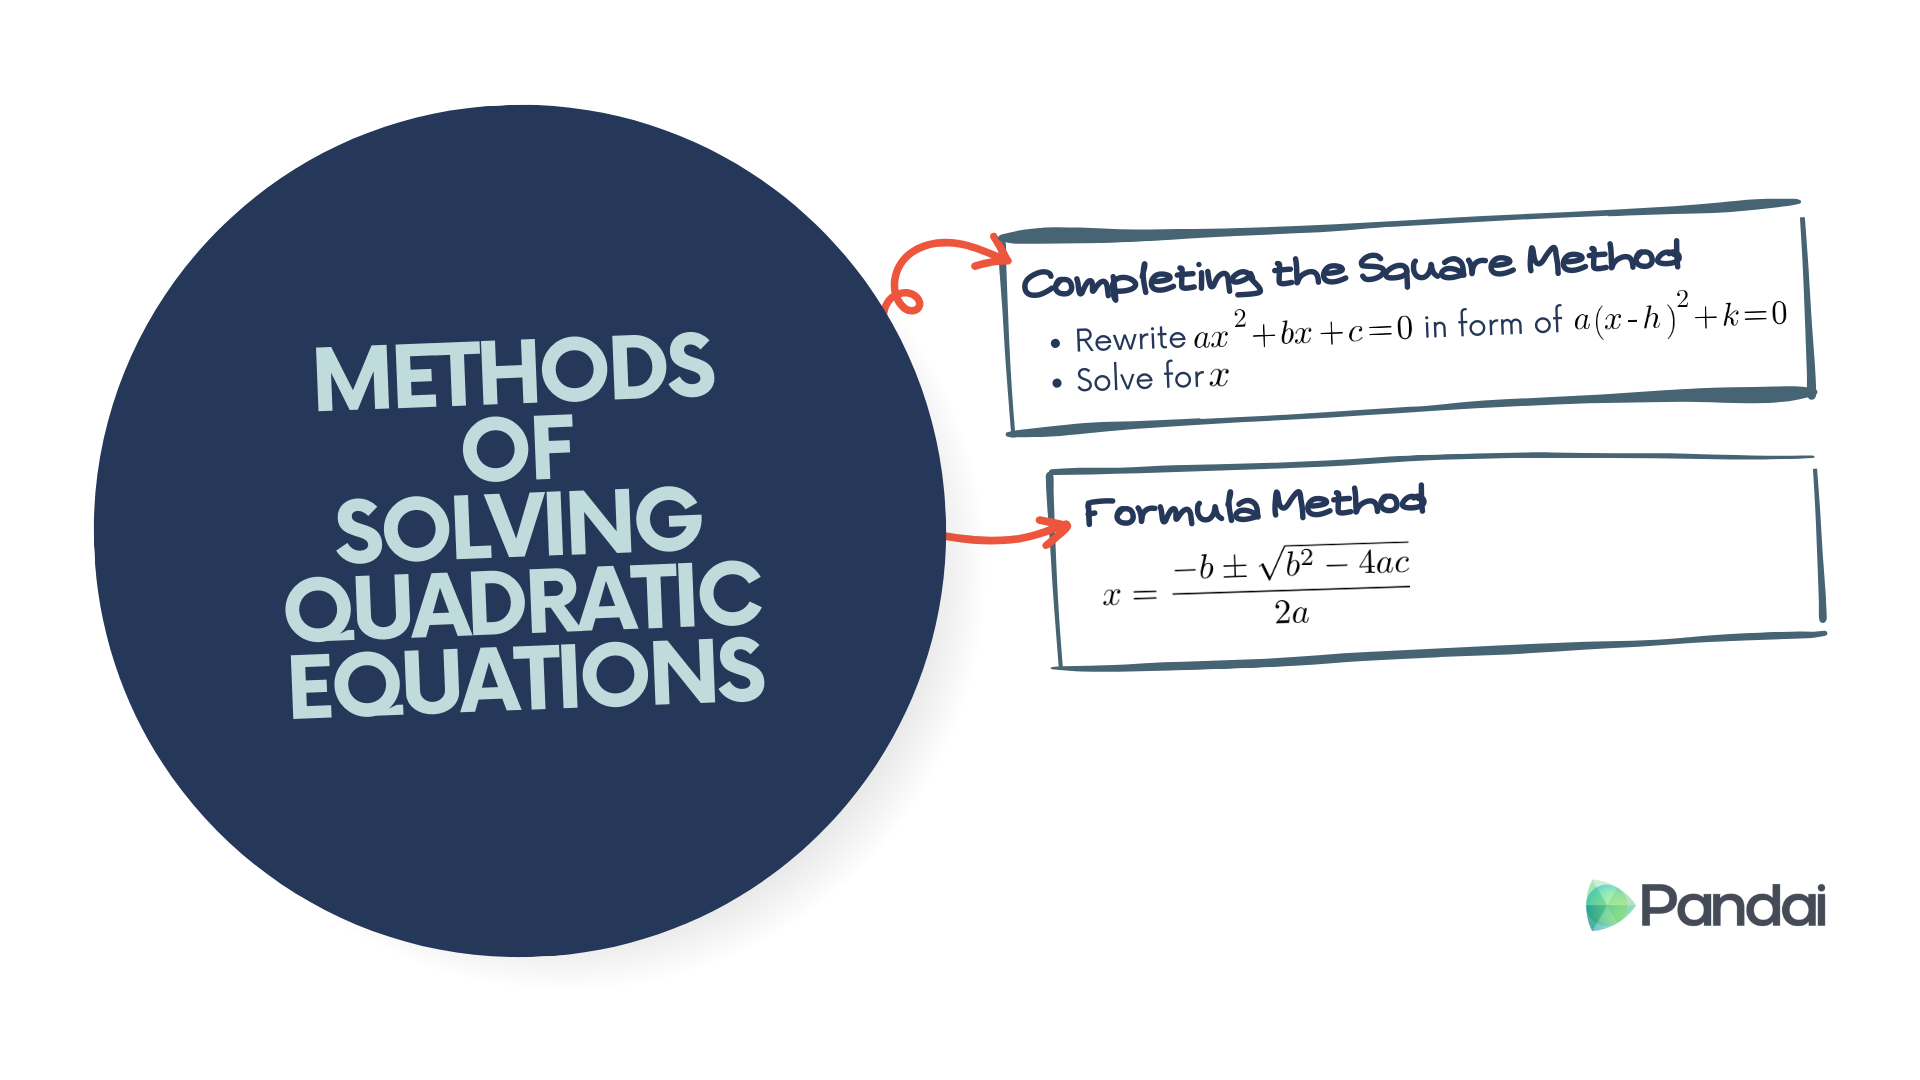 The image is an educational graphic titled ‘Methods of Solving Quadratic Equations.’ It features two methods: 1. ‘Completing the Square Method’: - Rewrite \( ax^2 + bx + c = 0 \) in the form of \( a(x - h)^2 + k = 0 \). - Solve for \( x \). 2. ‘Formula Method’: - Use the formula \( x = \frac{-b \pm \sqrt{b^2 - 4ac}}{2a} \). The graphic includes the Pandai logo at the bottom right corner.